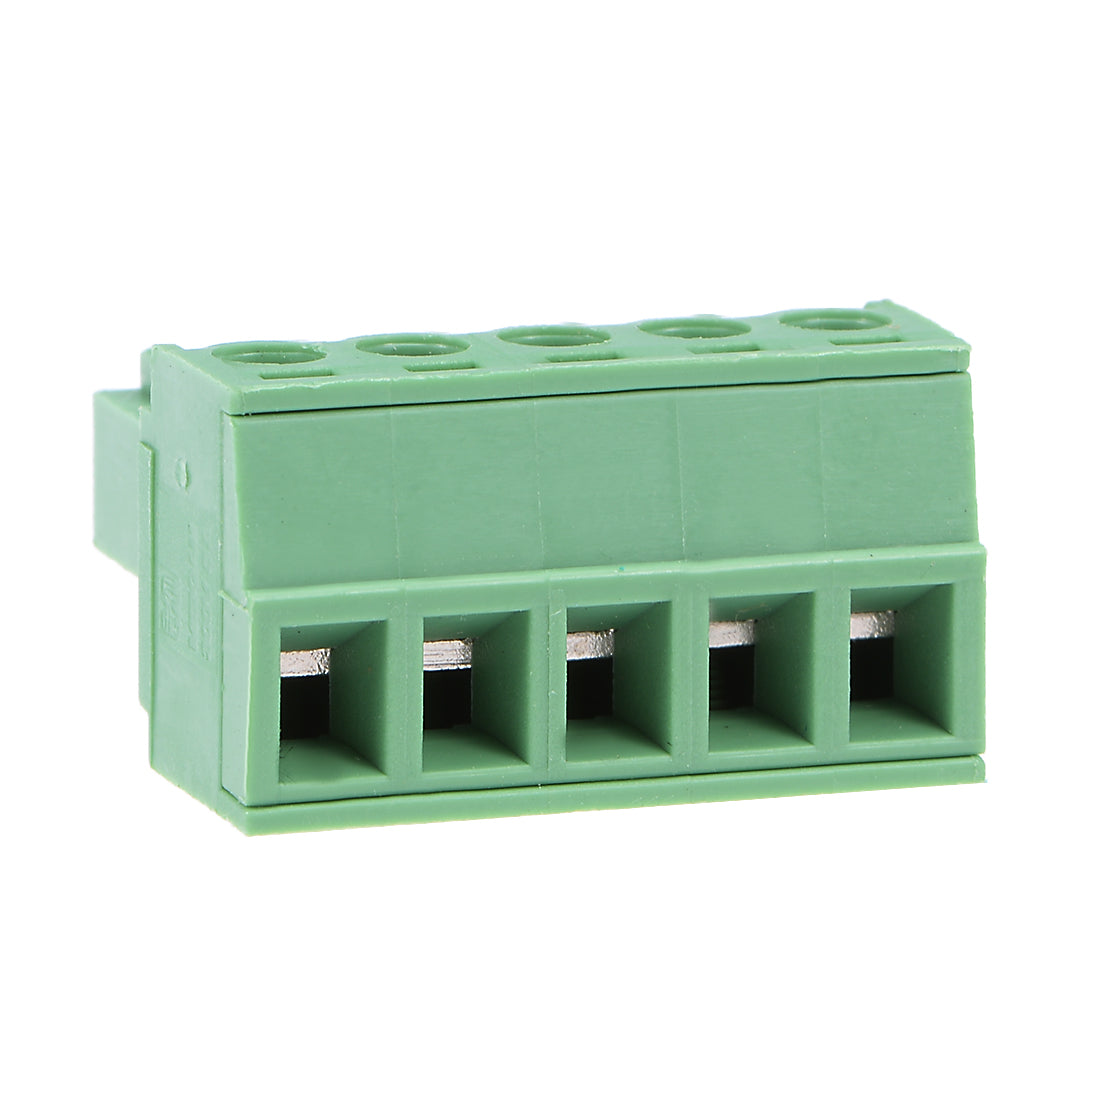 uxcell Uxcell 4Pcs AC300V 8A 3.81mm Pitch 5P Flat Angle Needle Seat Insert-In PCB Terminal Block Connector green